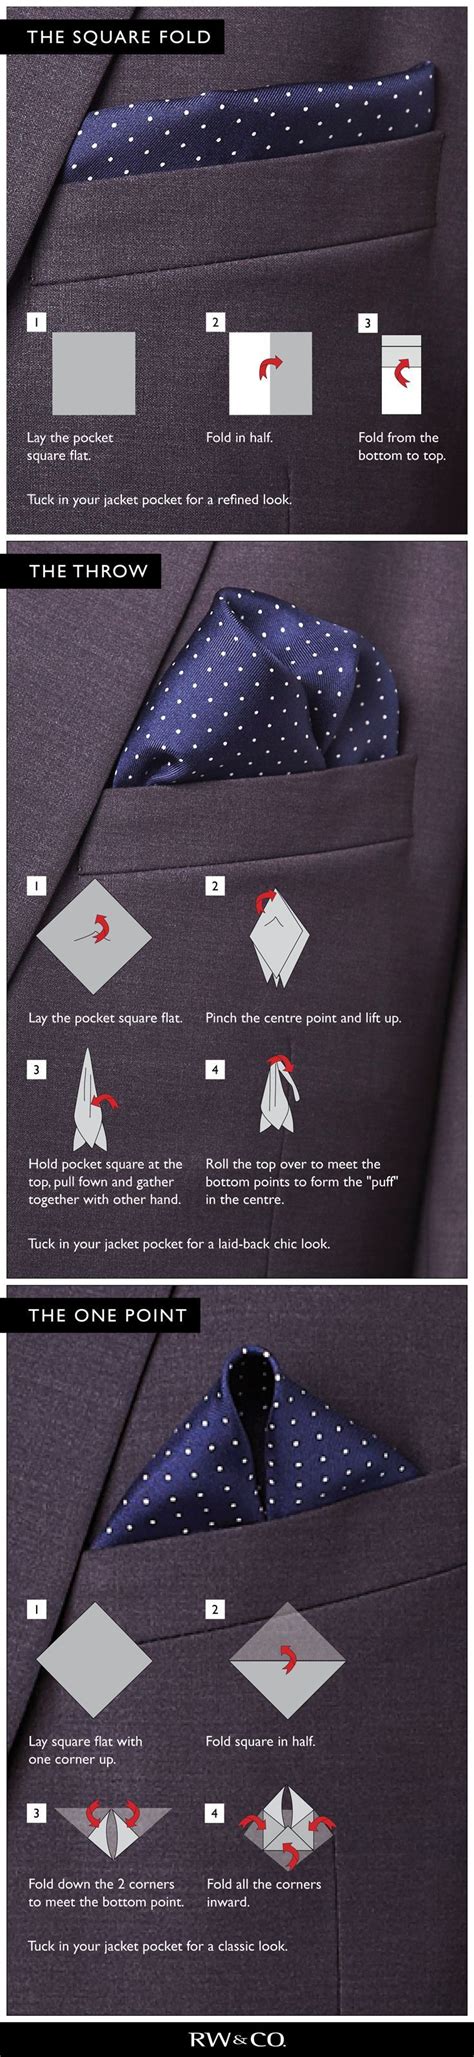 How to fold a collared shirt. How to Fold That Pocket Square... | Well dressed men, Pocket square